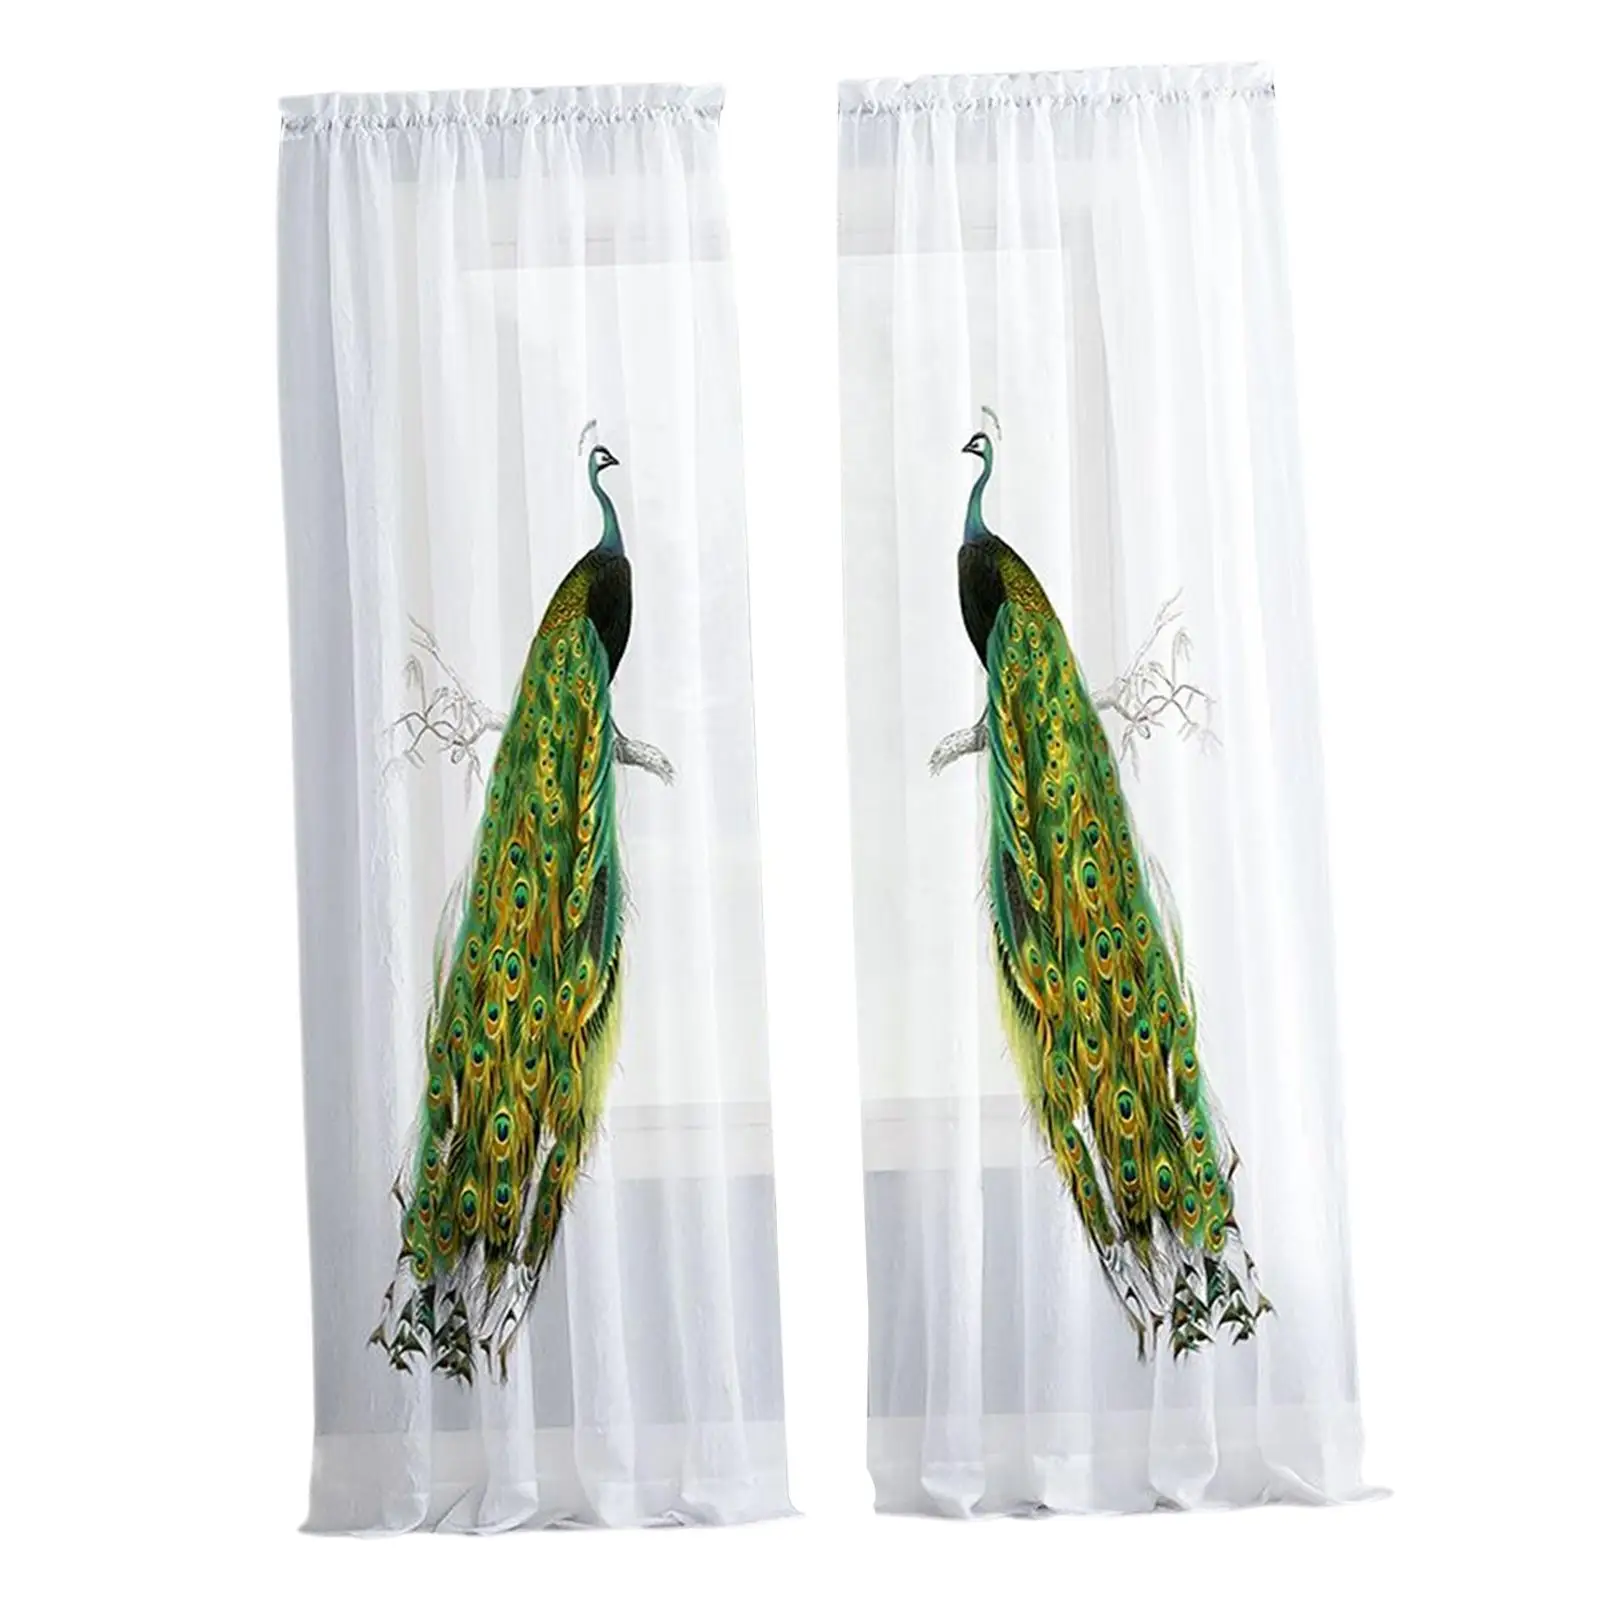 2x Sheer Curtain Peacock Pattern Curtain Panels for Kitchen Laundry Room Nursery